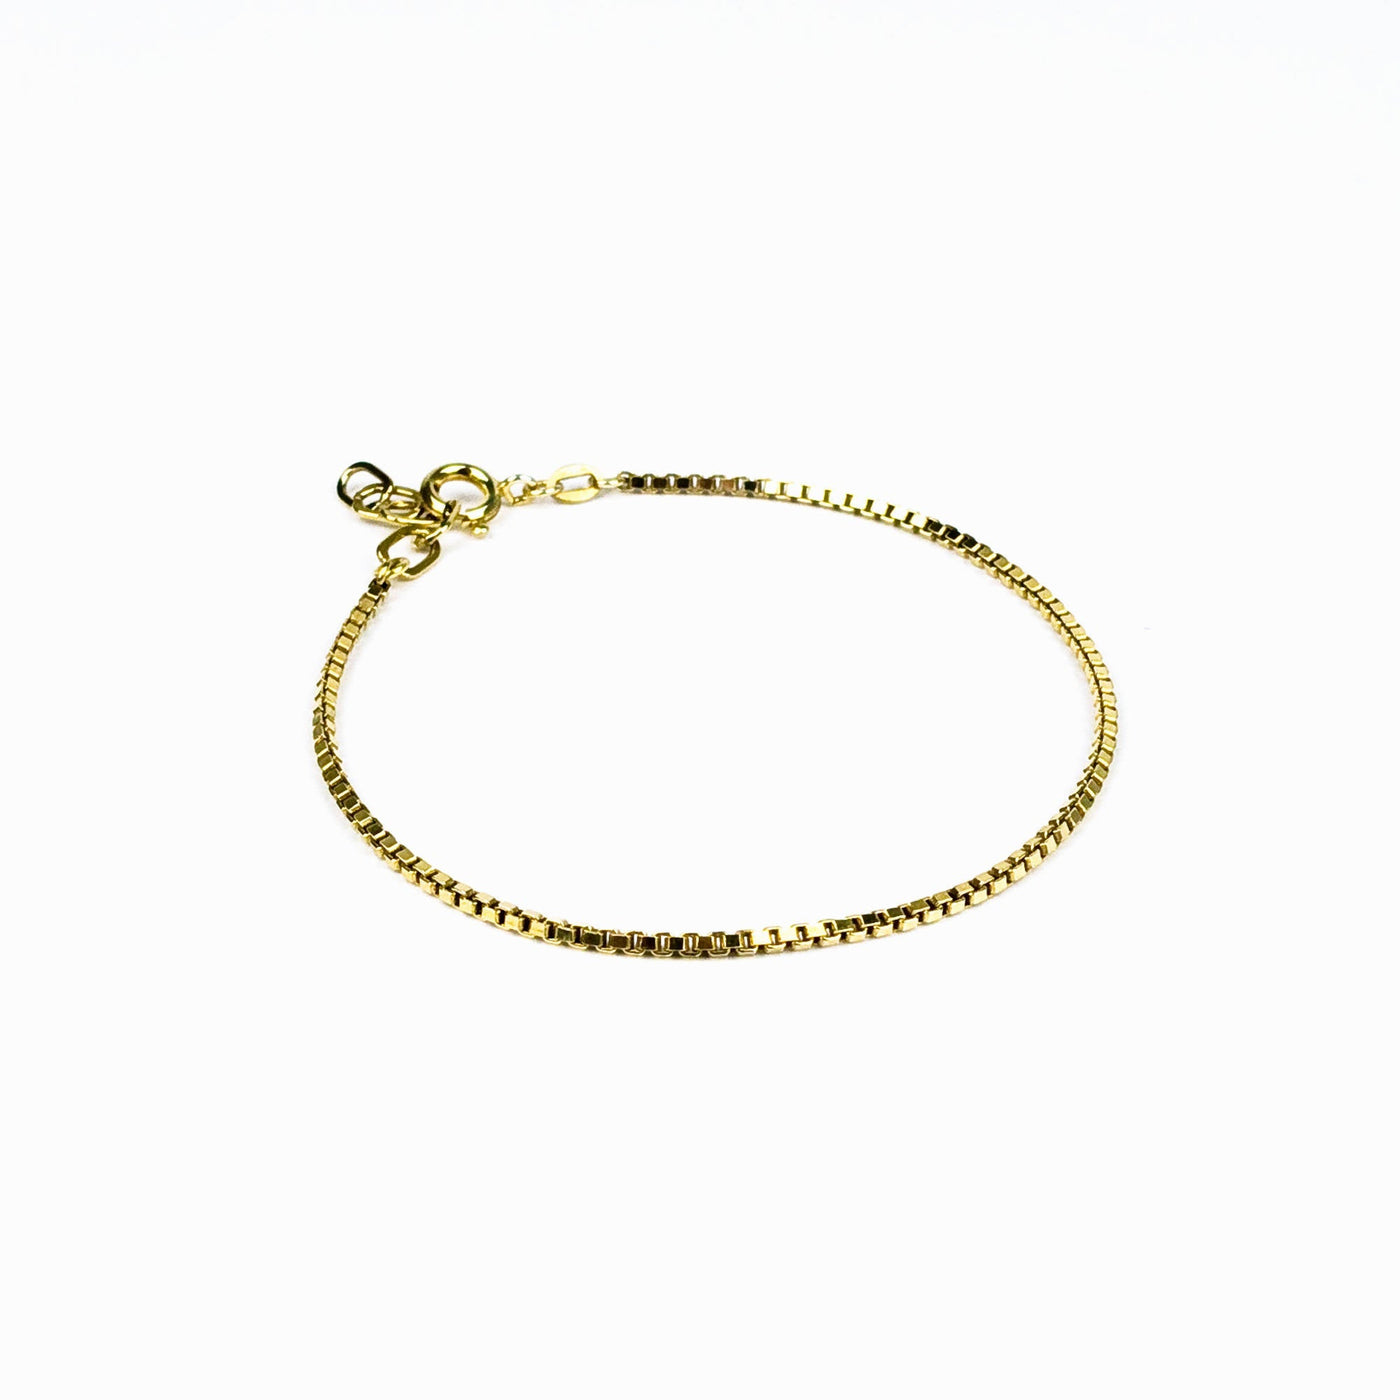 VENEZIA THIN – Armband in Silber, Gold oder Roségold